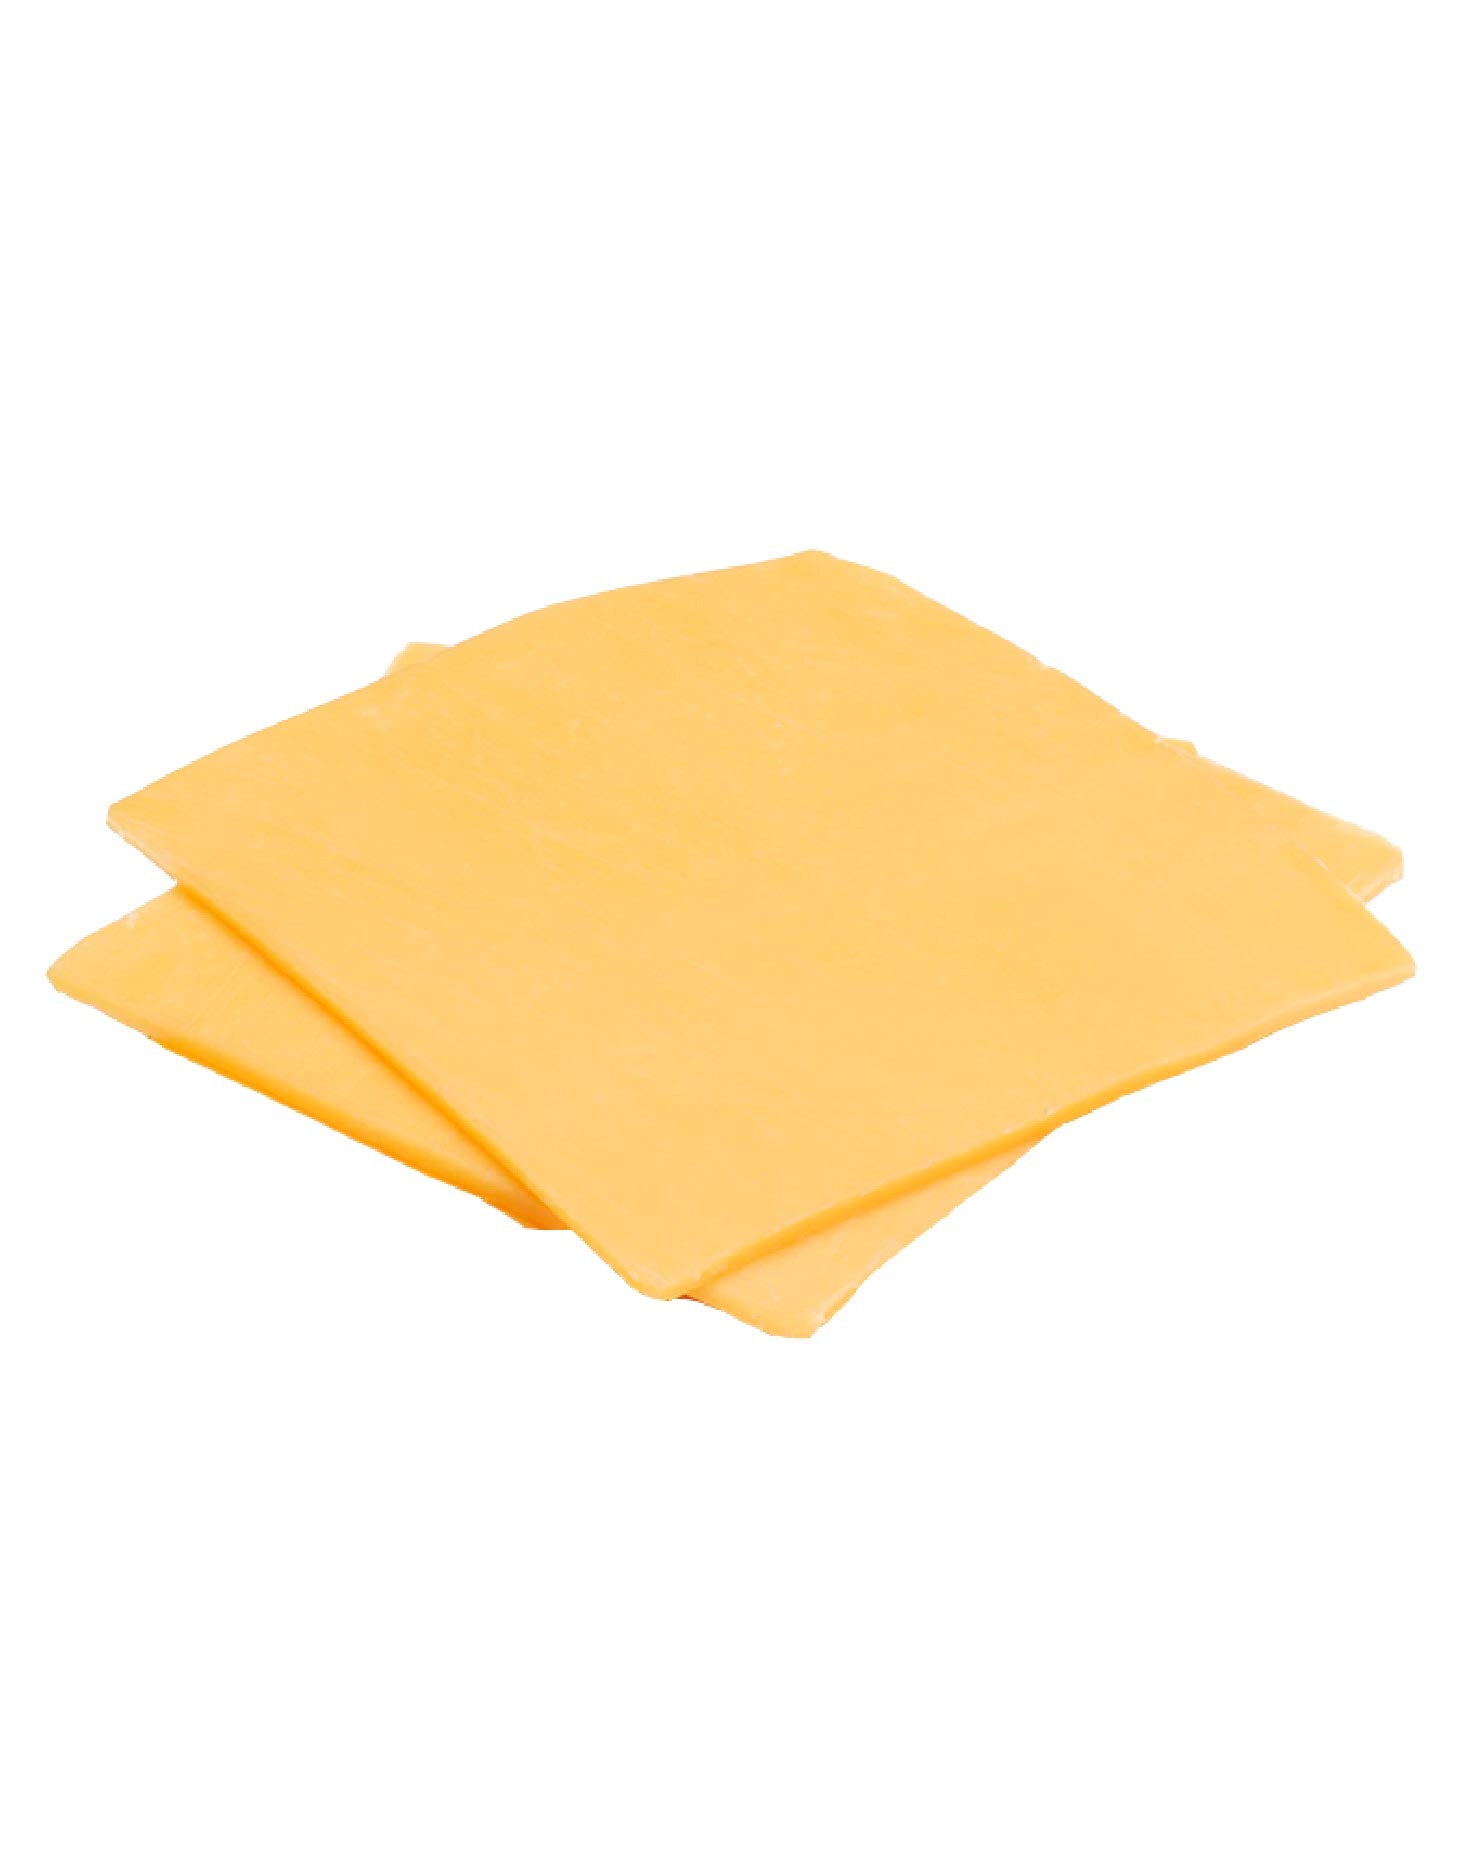 Armstrong Cheddar Cheese Slices